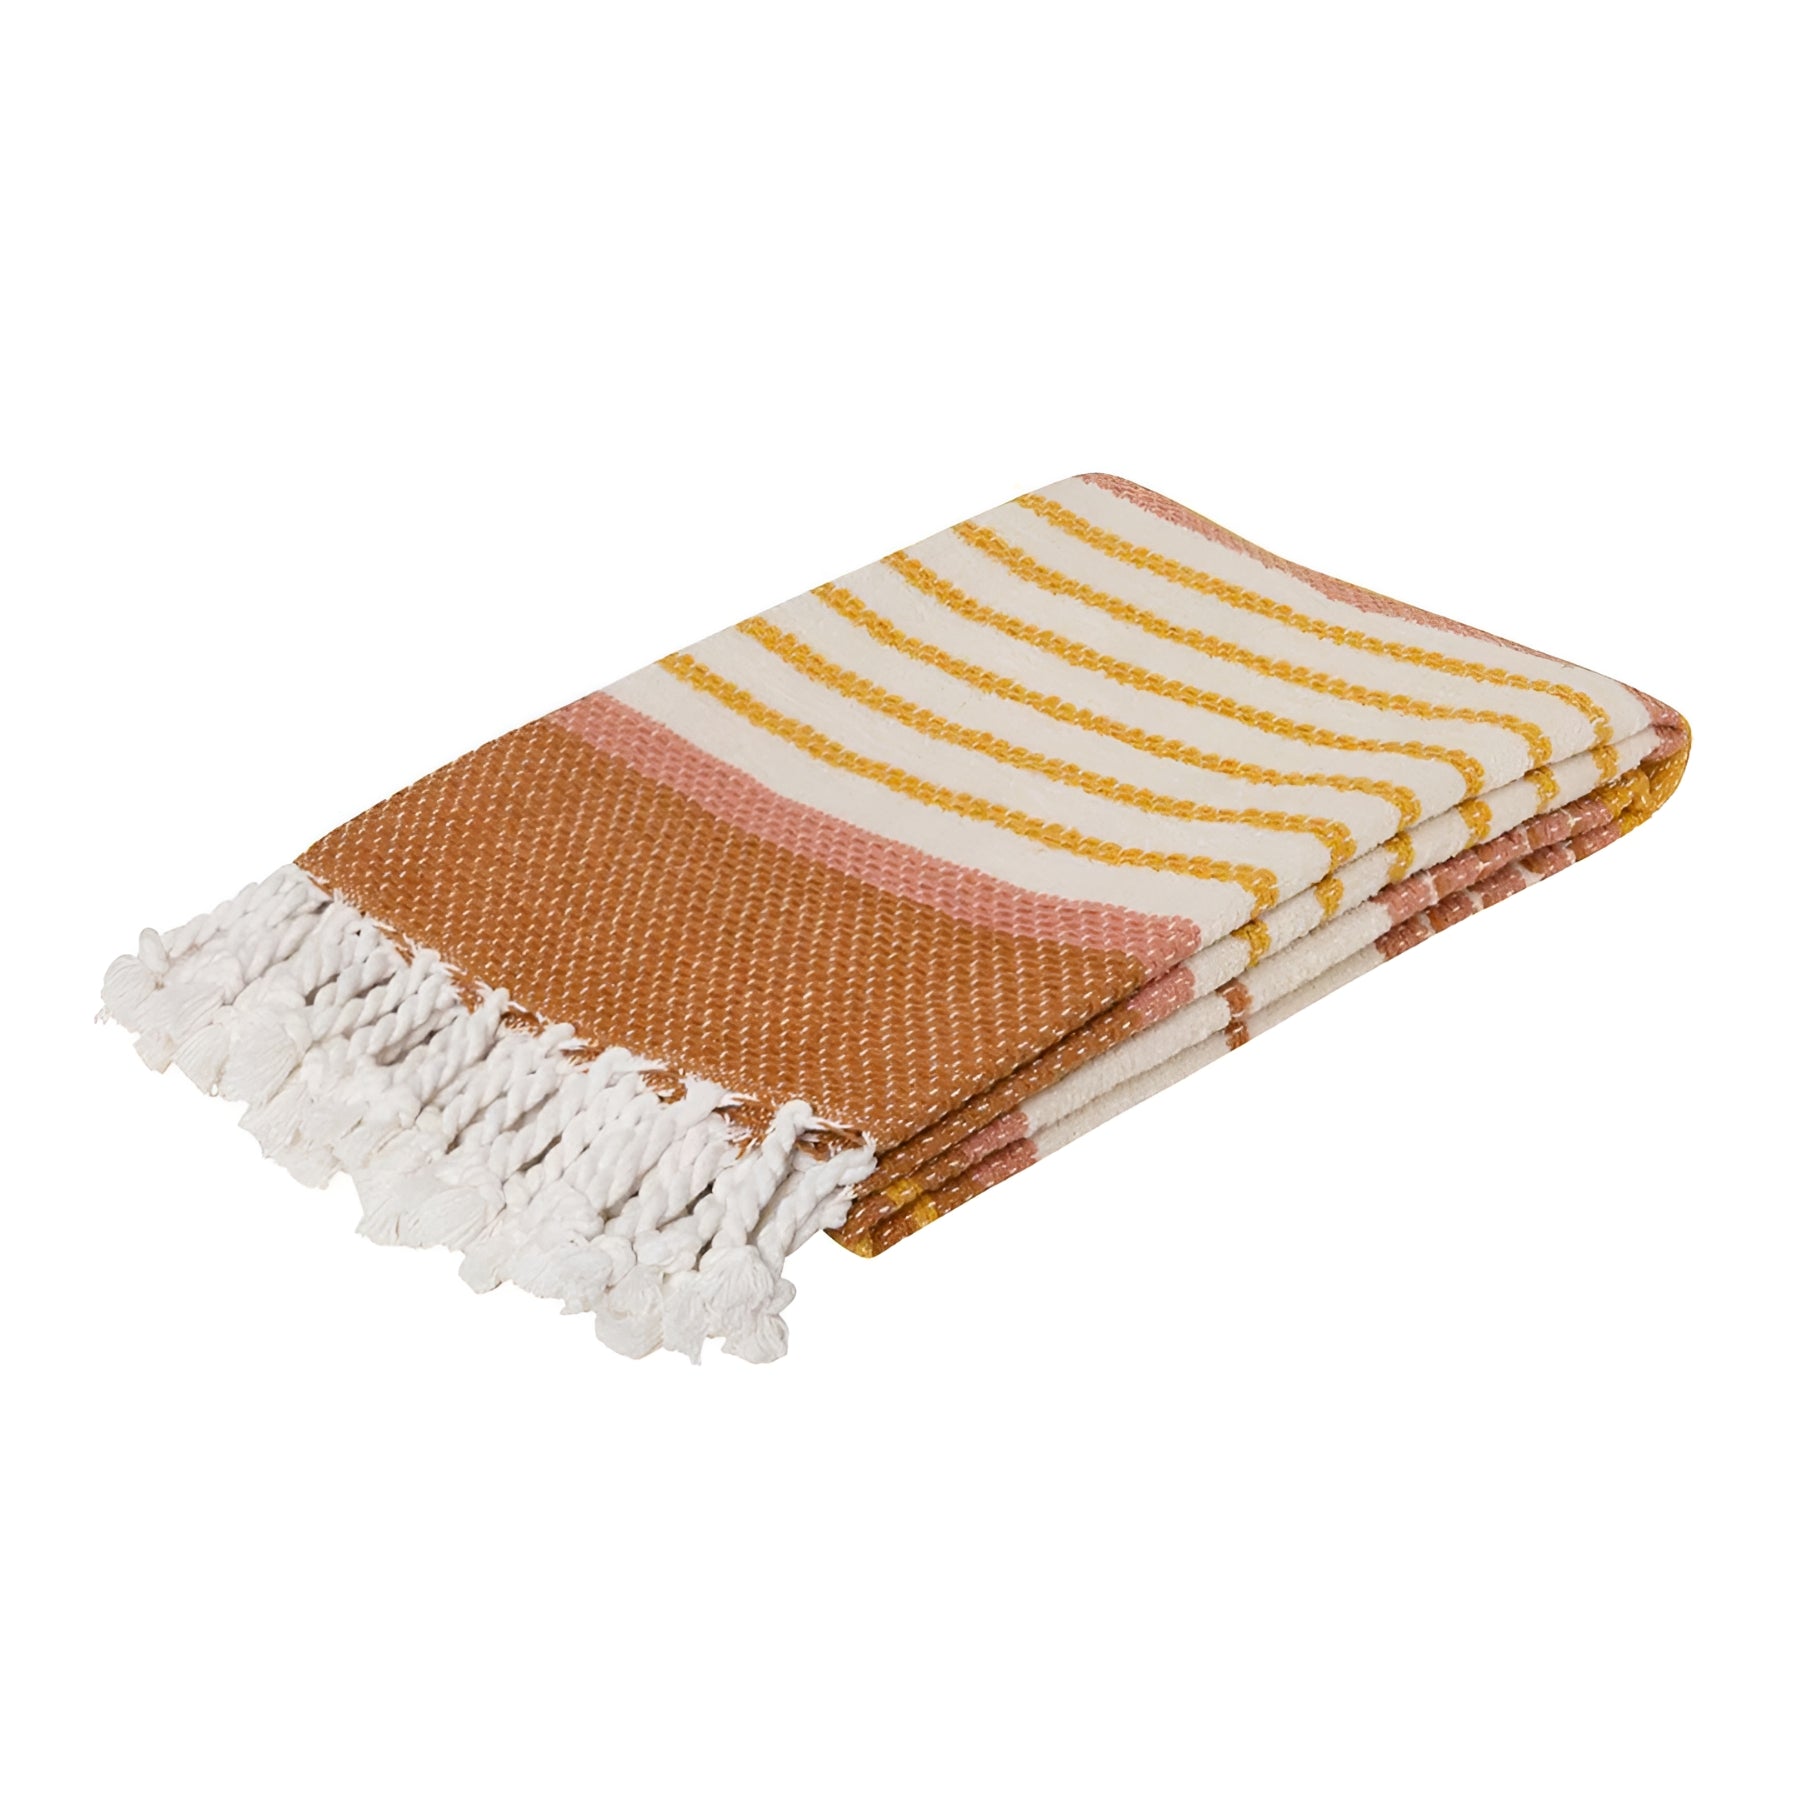 Zephyr Throw Blanket in Peach Hues with mustard accents and white tassels, folded neatly.